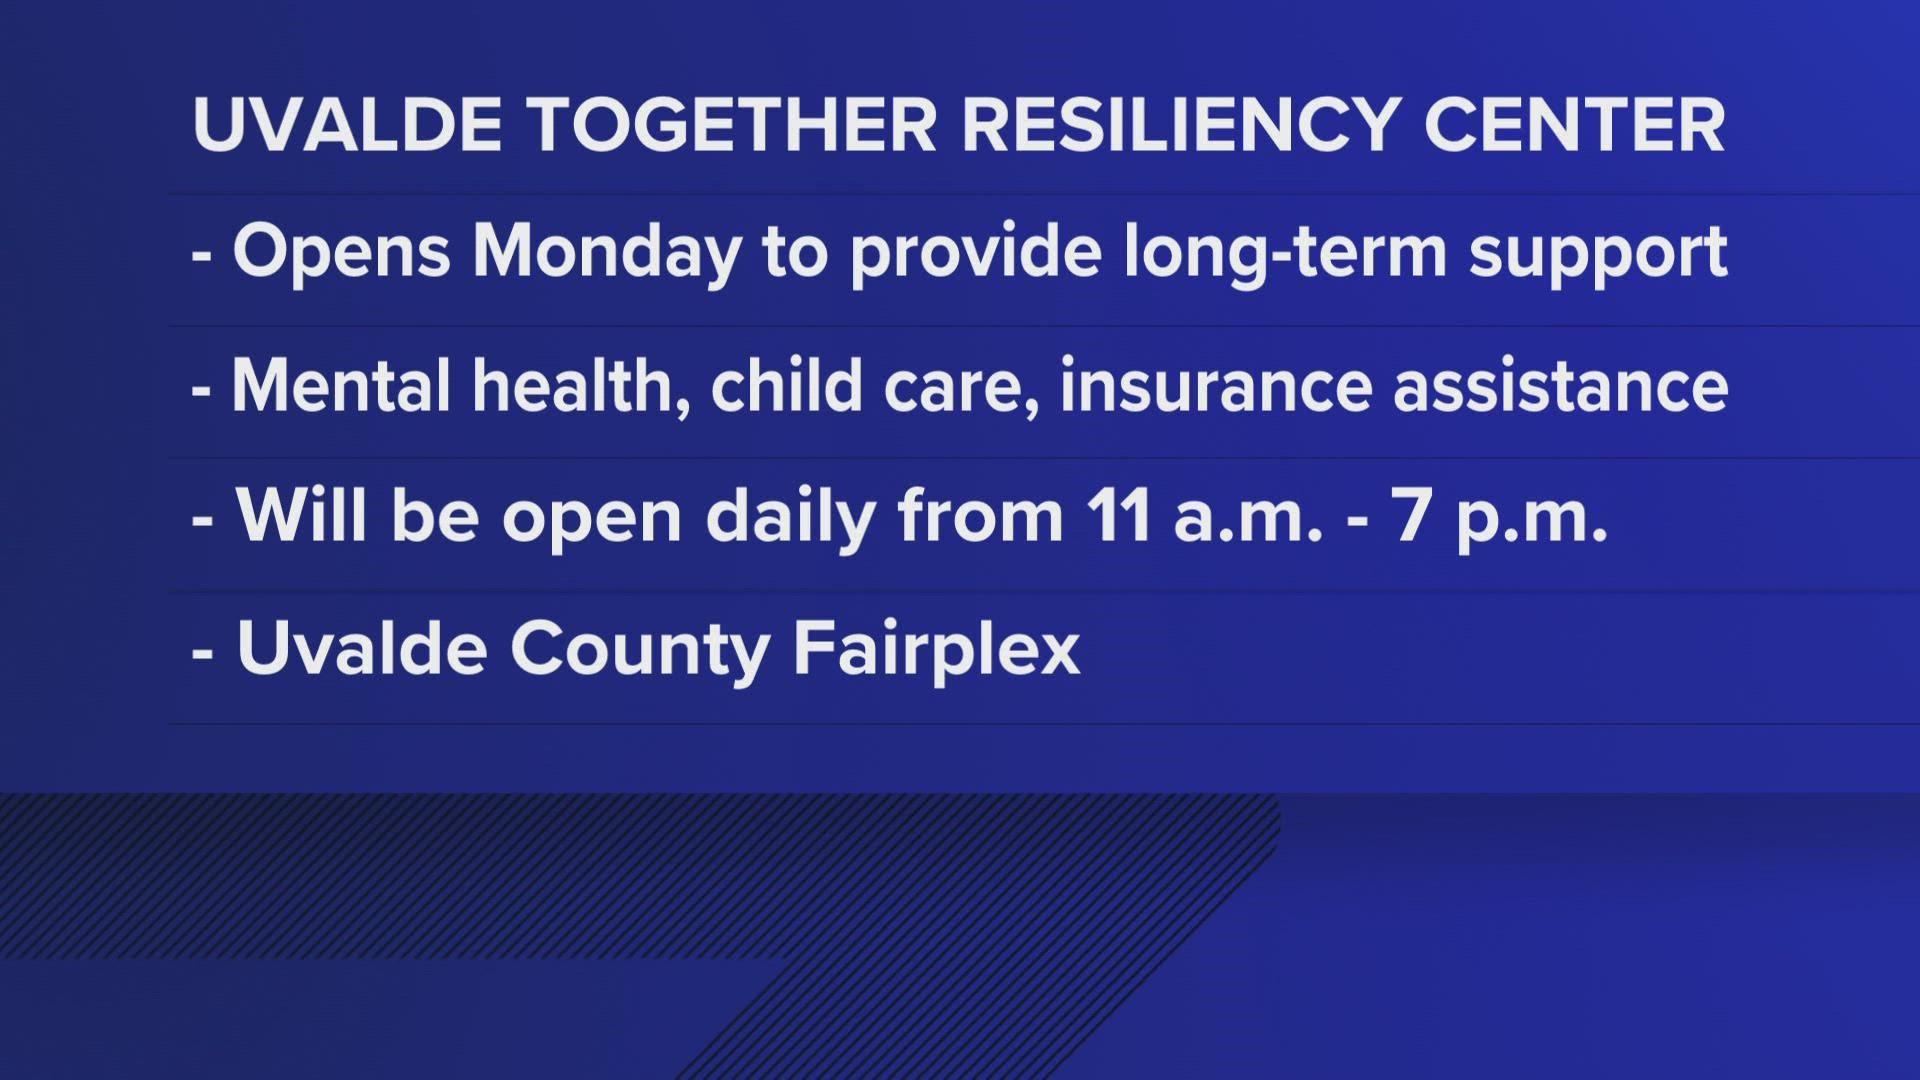 The newly created "Uvalde Together Resiliency Center" will open its doors to provide support services for the community following the school shooting.